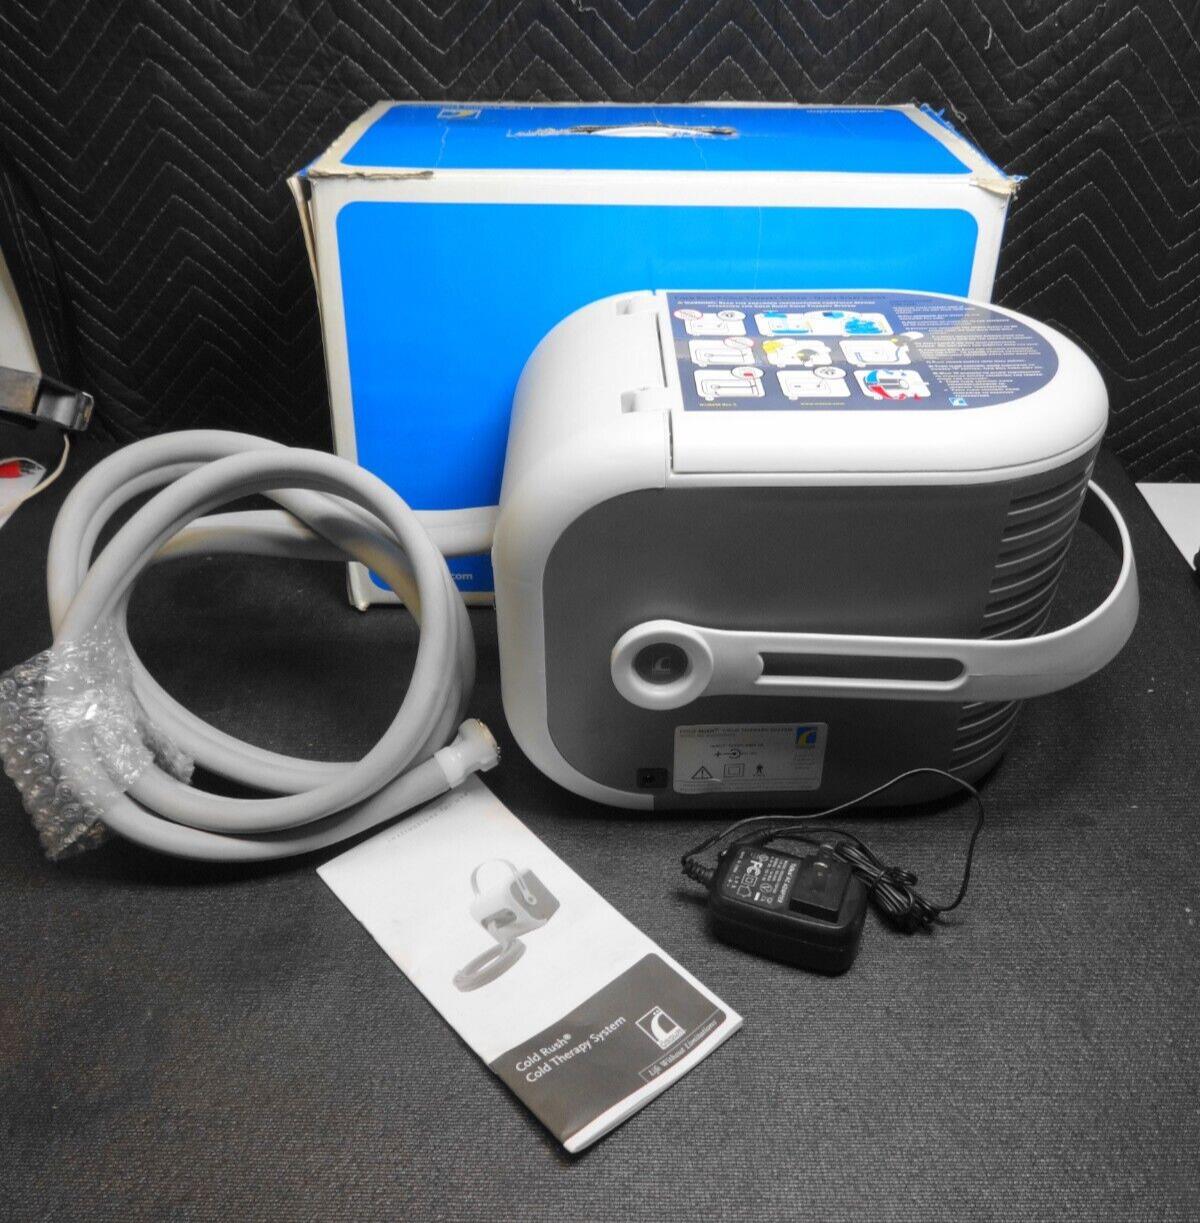 Cold Rush Cold Therapy Kit w/ Power Cord B-232000010 NO PAD - WORKS GREAT!